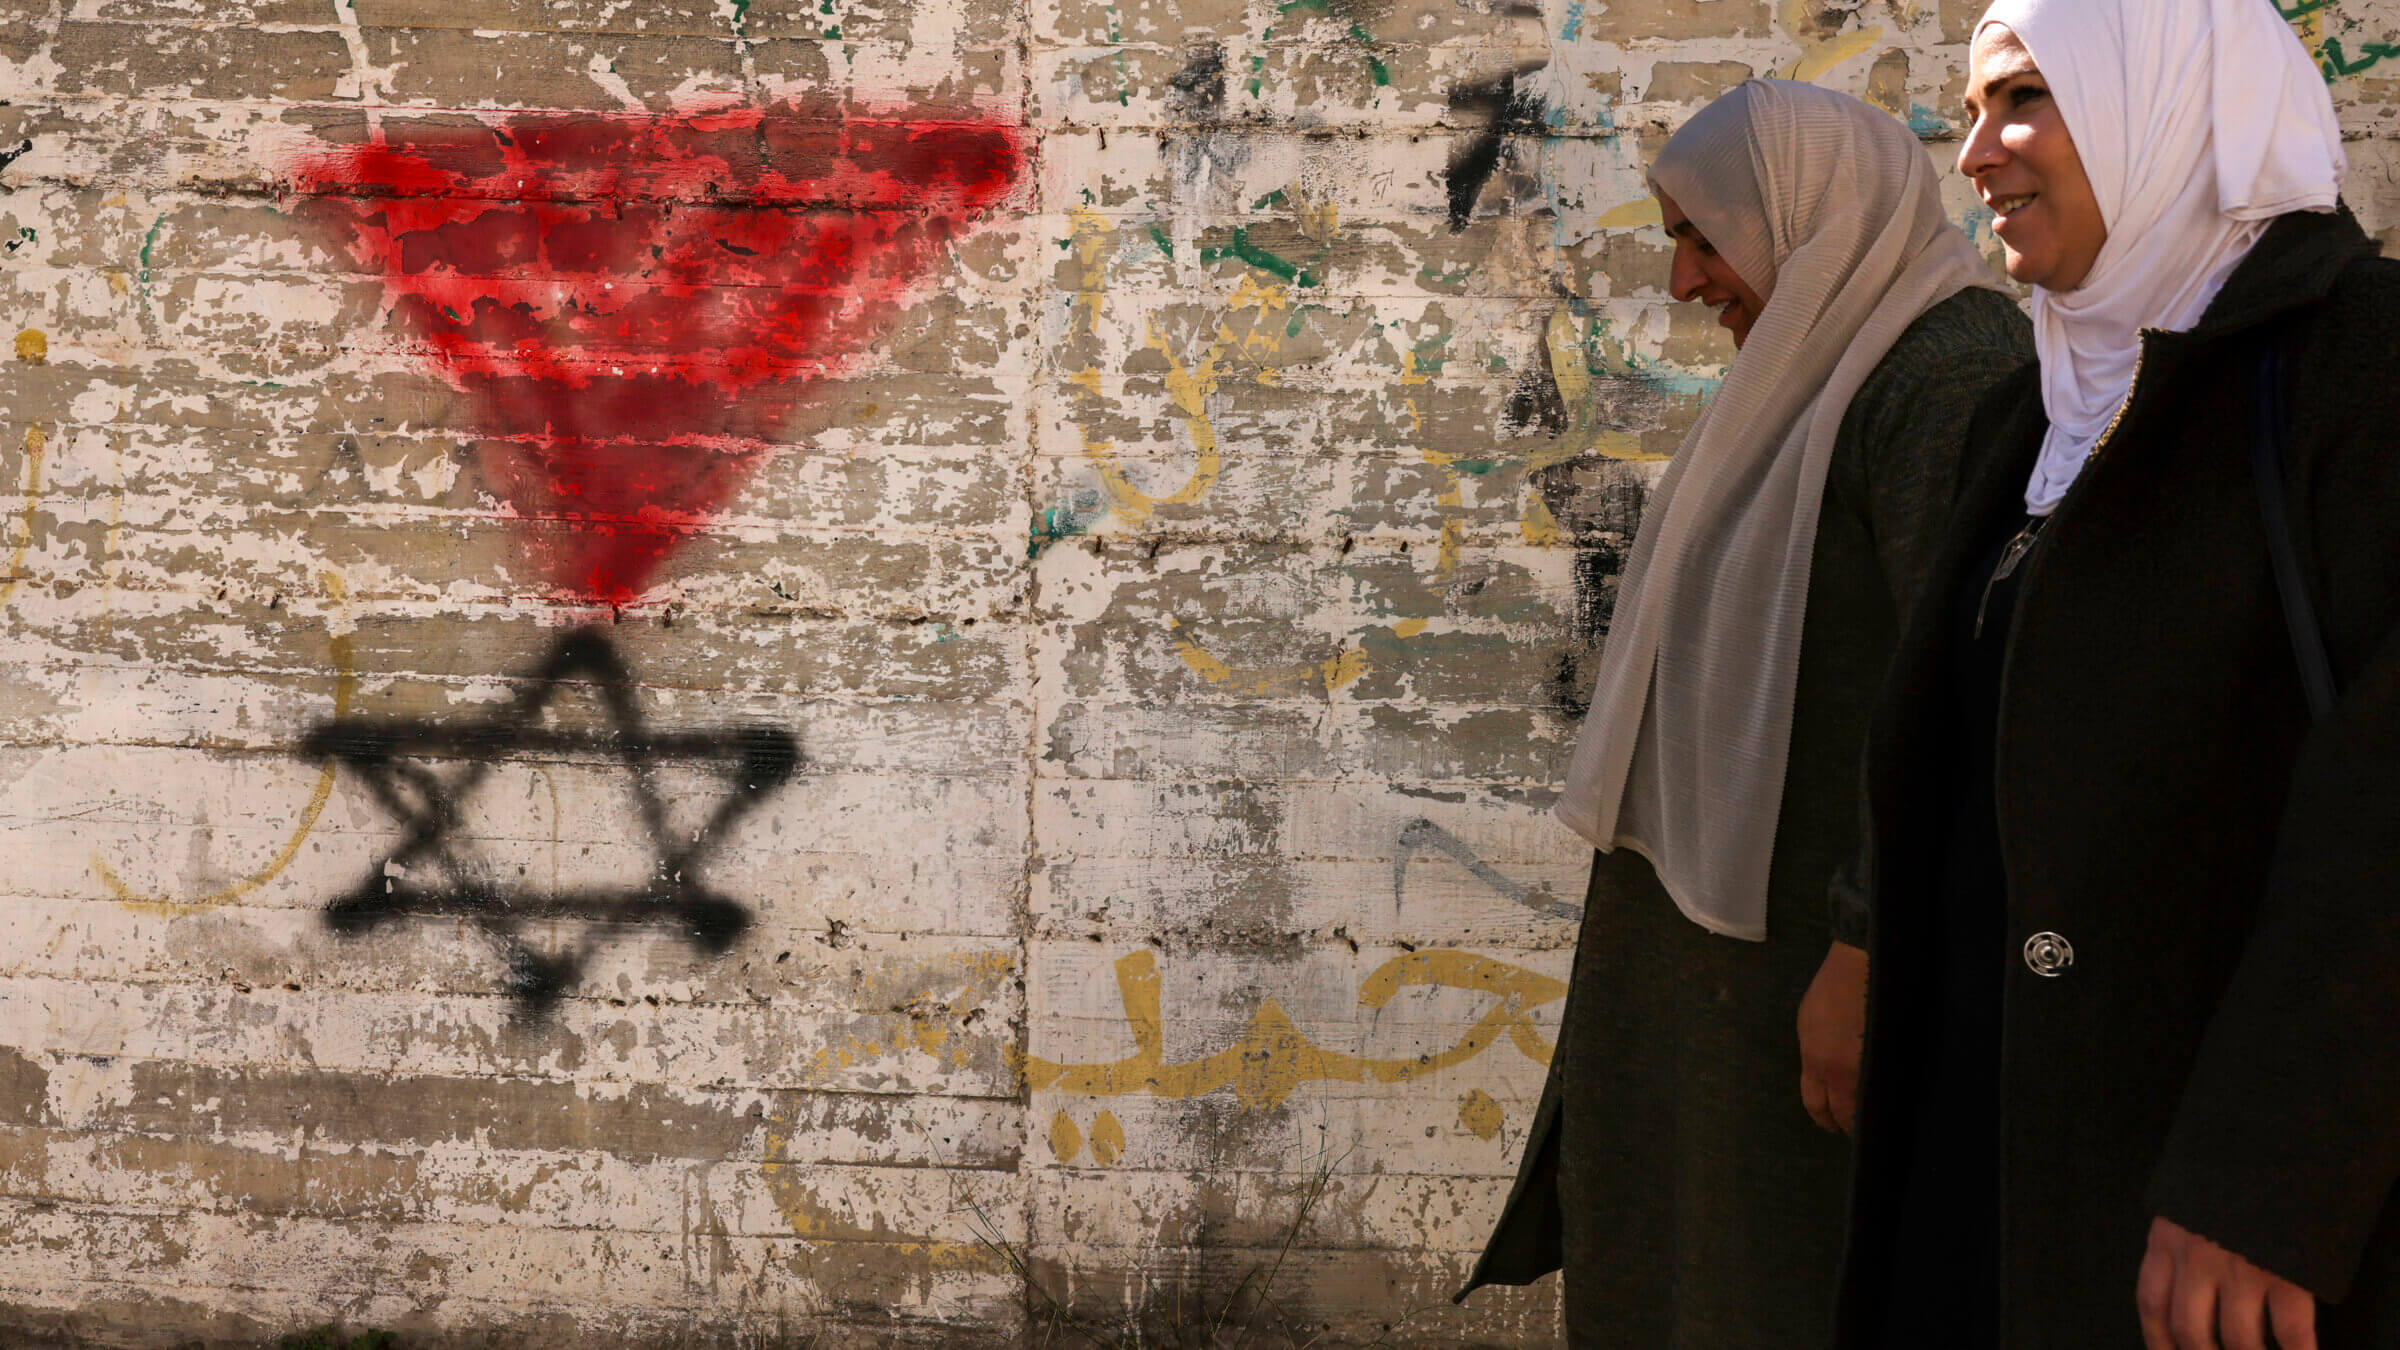 Palestinian women walk past a graffiti of the Star of David under an inverted "red triangle", a symbol that Hamas'  military wing, the Al-Qassam Brigades, uses to identify Israeli targets in their videos, in the occupied West Bank city of Hebron on Nov. 30, 2023